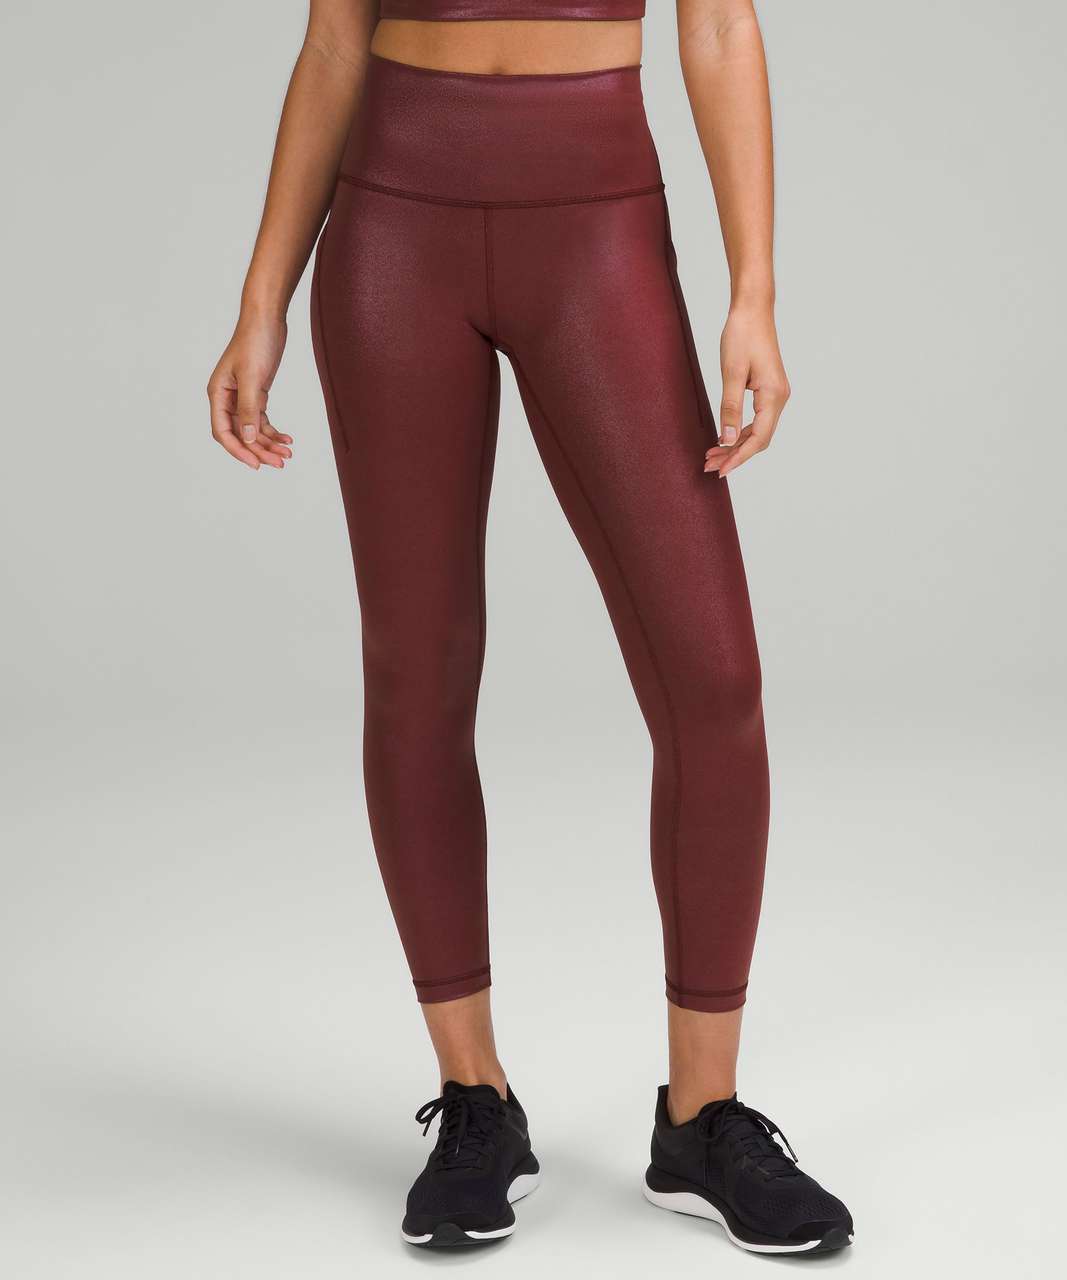 Lululemon Align High-Rise Pant with Pockets 25 - Red Merlot Size 0